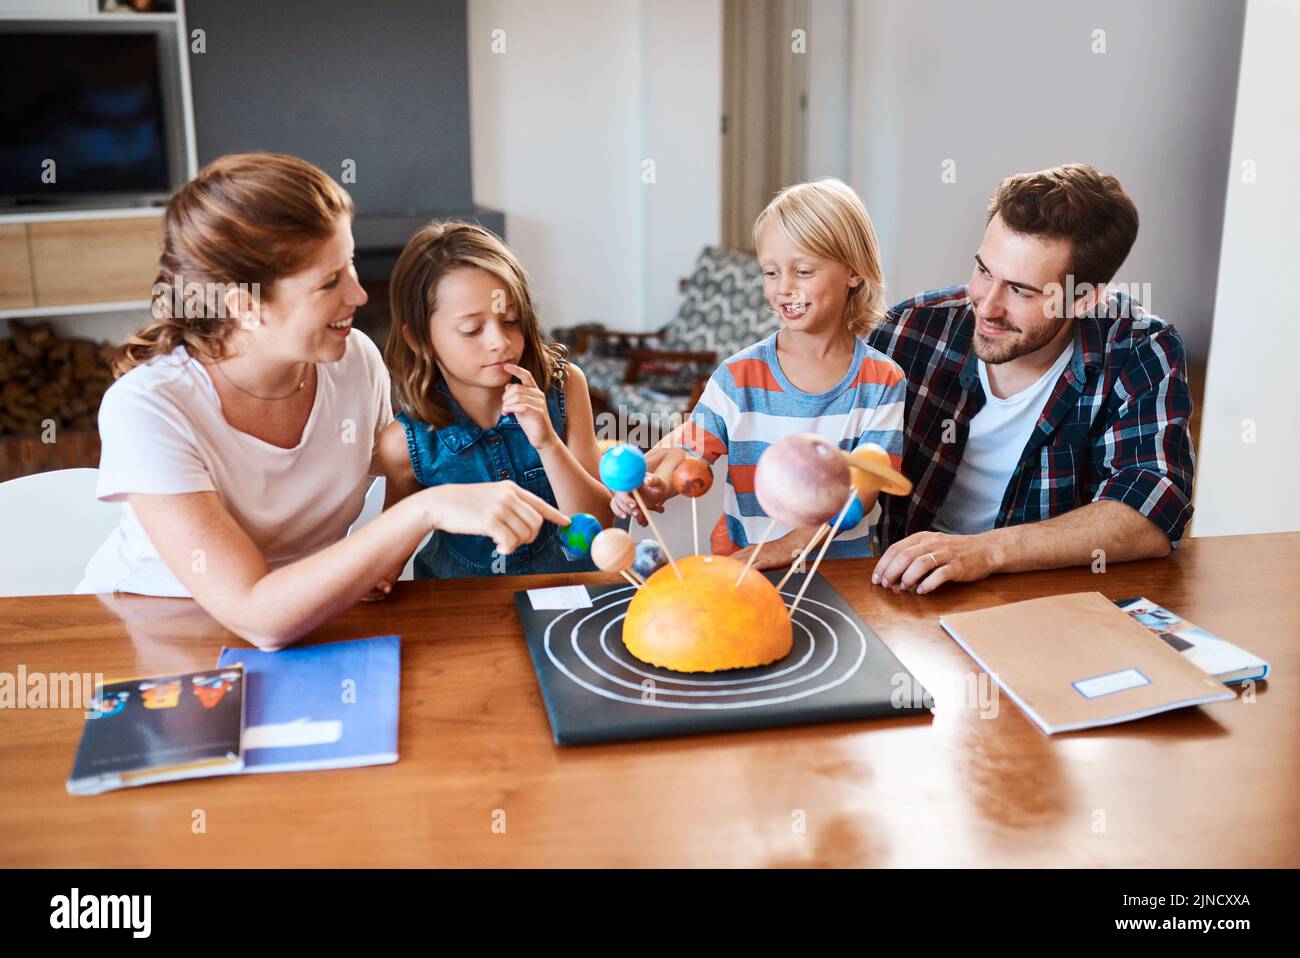 Learning about the universe is always fun. a beautiful young family working together on a science project at home. Stock Photo